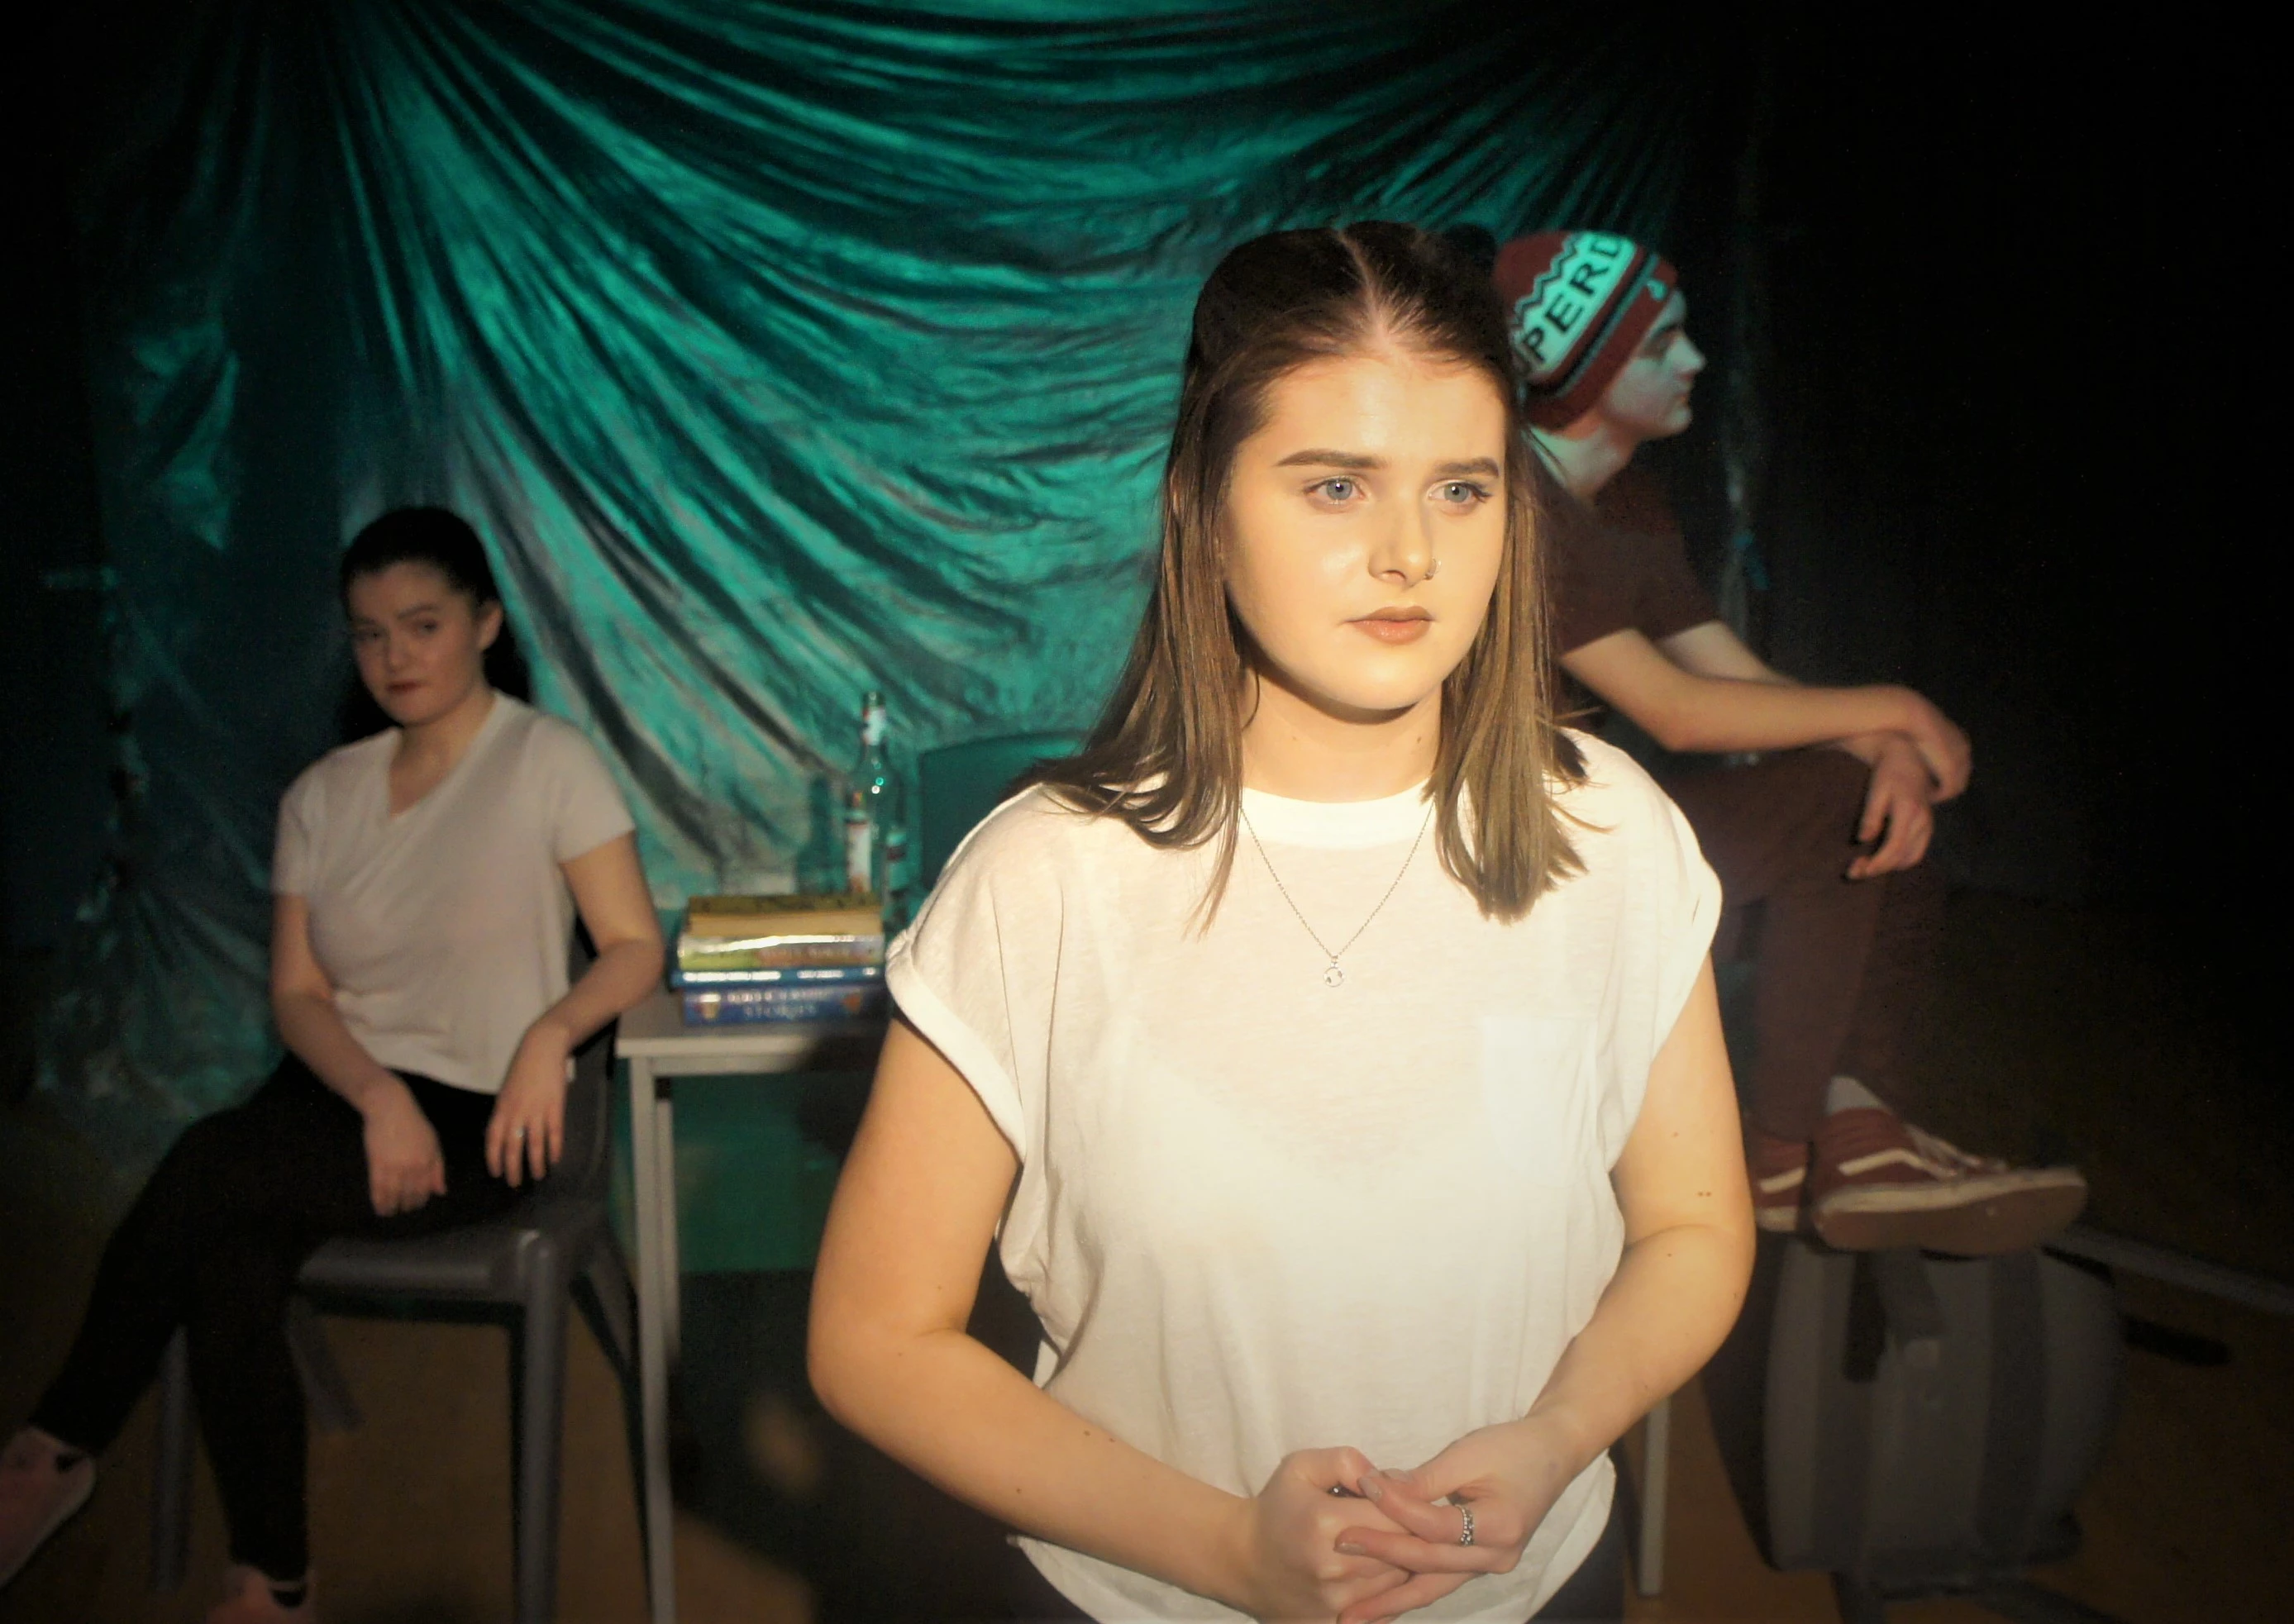 Newcastle Sixth Form College – Drama Performance Examination – March 2019 – Students performing scene from Fewer Emergencies by Martin Crimp  L-R  - Megan Heslop, Katie Stubbs, Ruairi Reed